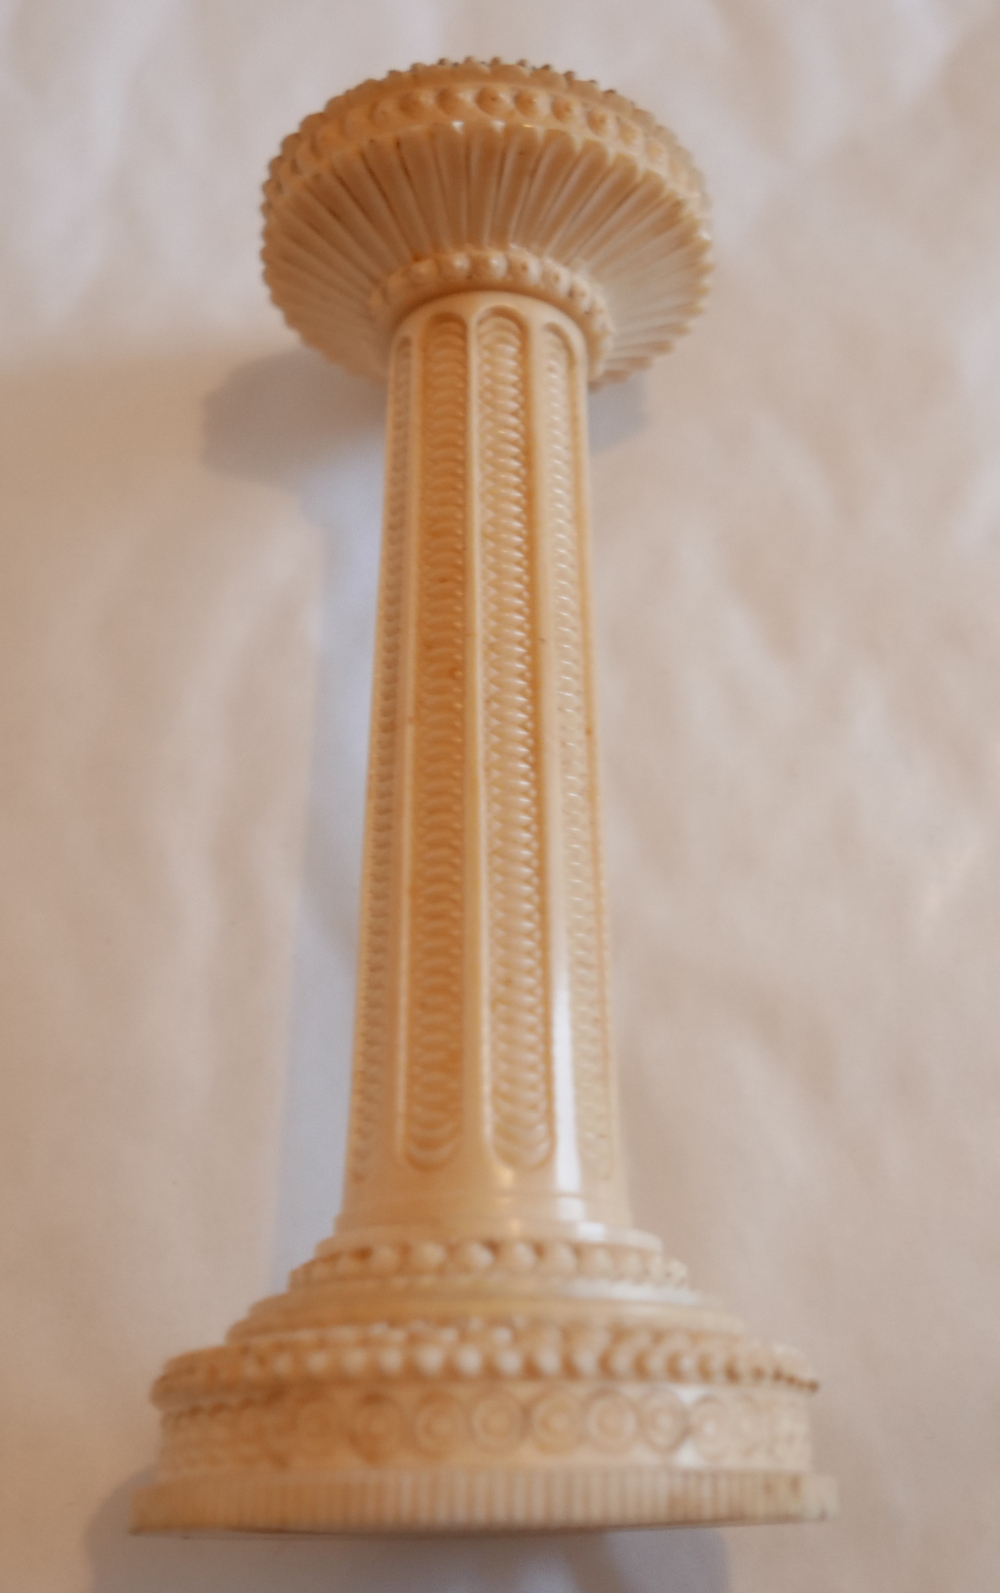 Antique Miniature Ivory Sundial and Thermometer - 6 1/4" (160mm) tall. - Image 4 of 6